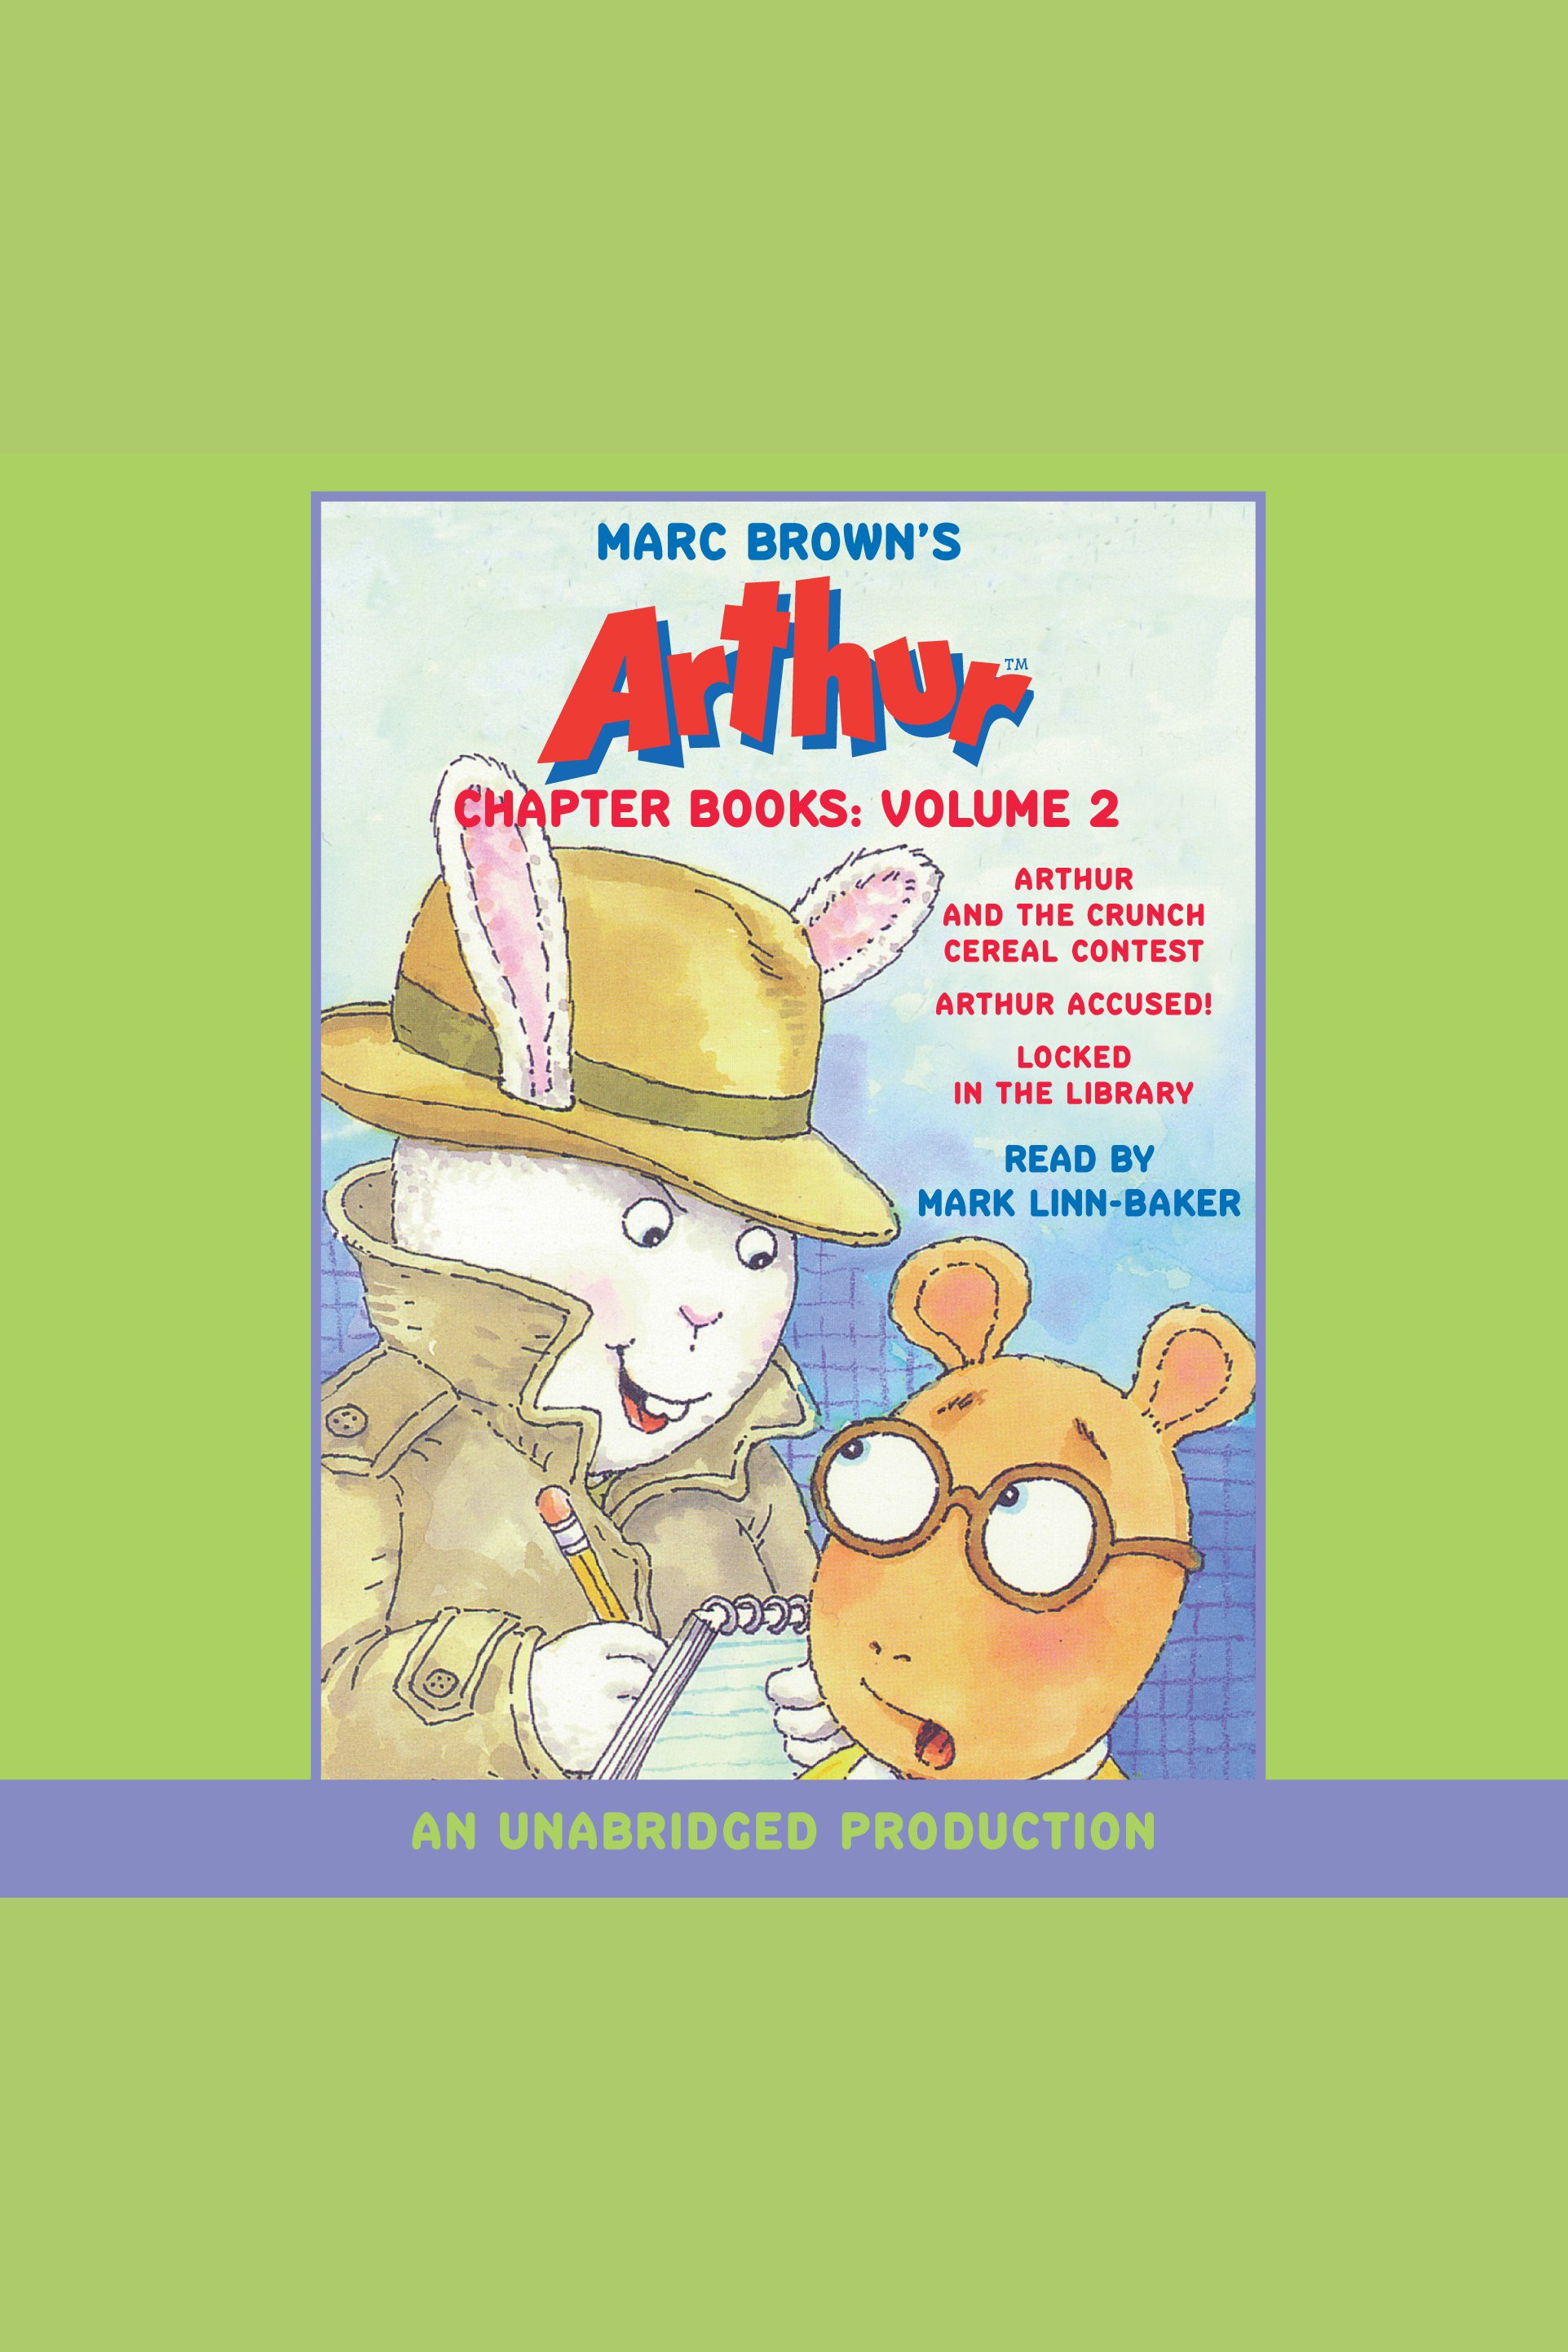 Marc Brown's Arthur chapter books: Volume 2 cover image